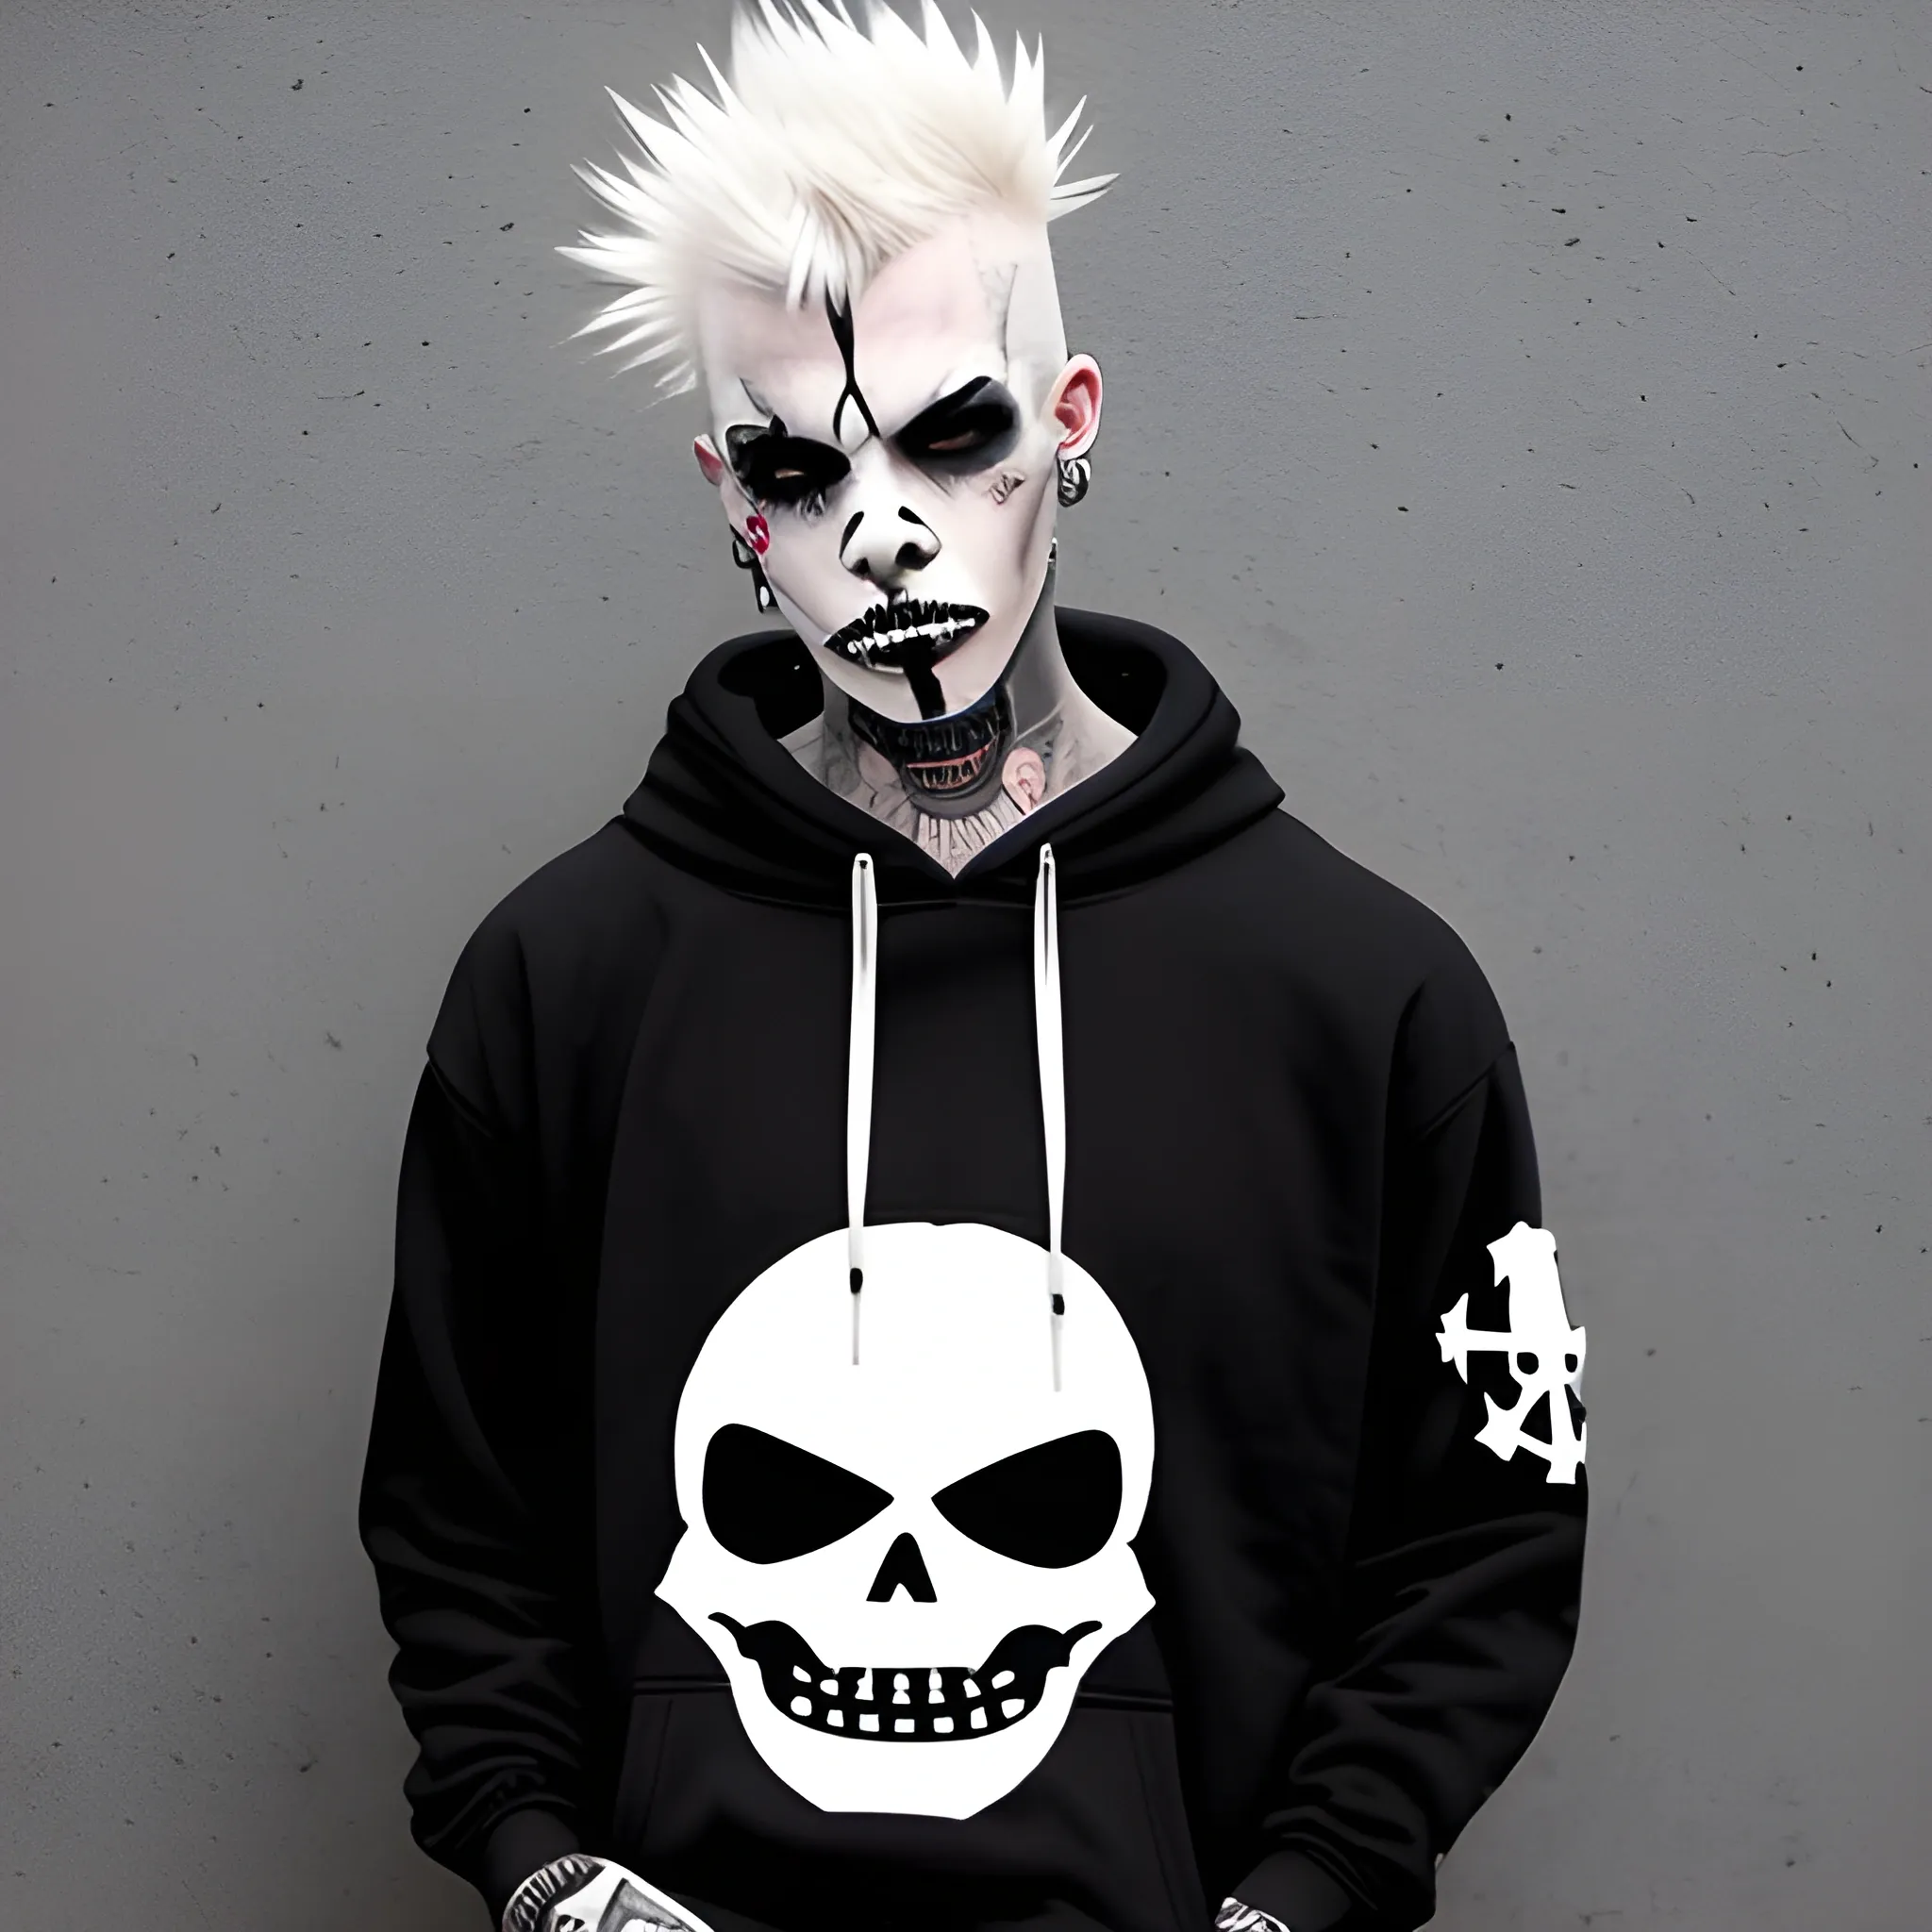 White Punk Character, Black Hoddie With Crossbones logo in the front, extremely high quality